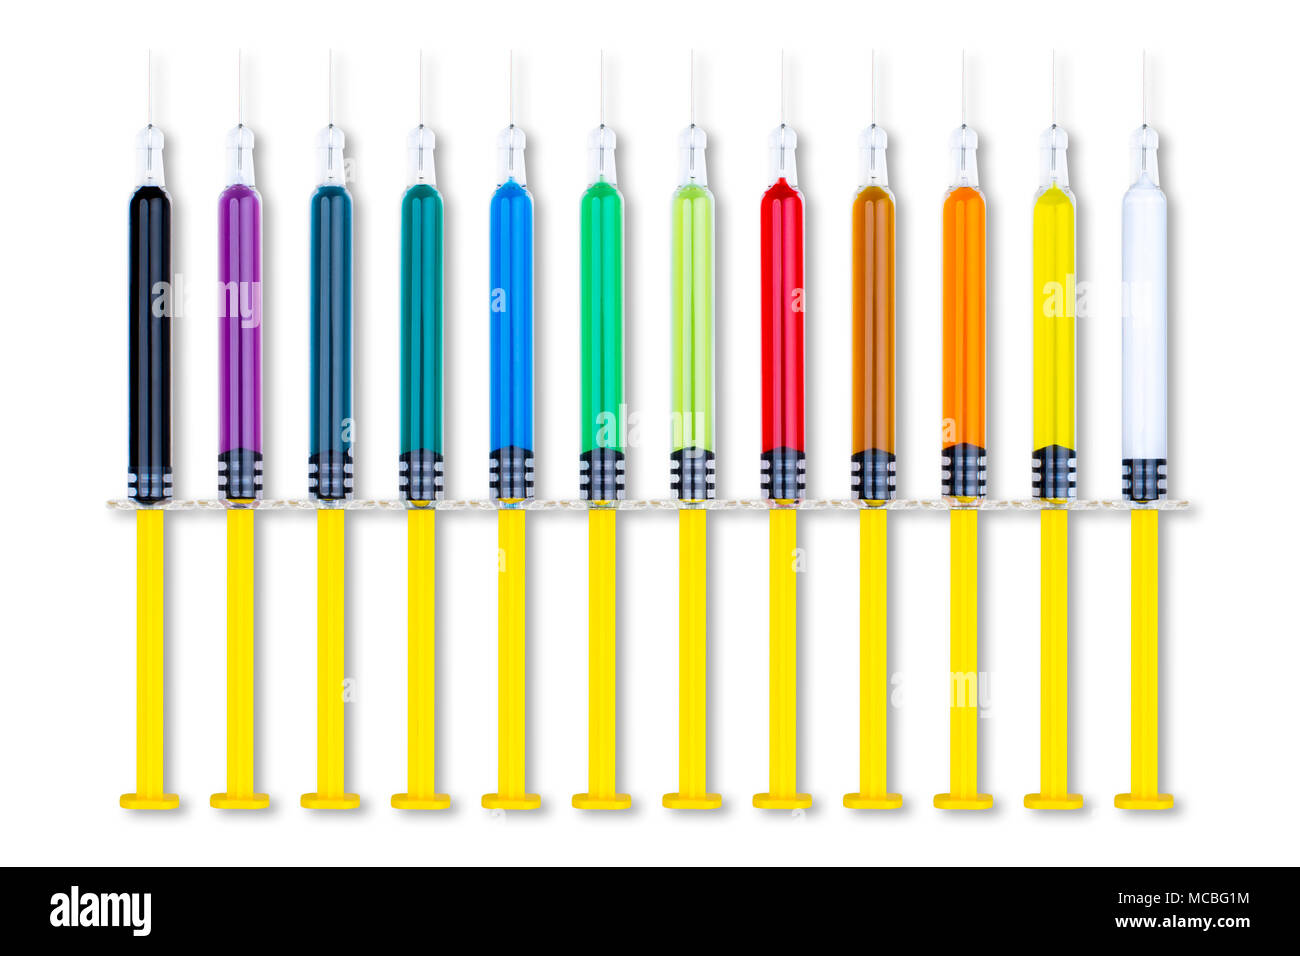 Multiple syringes with needles, filled with various colours of medicine/vaccines. Isolated on white. Path included. Stock Photo